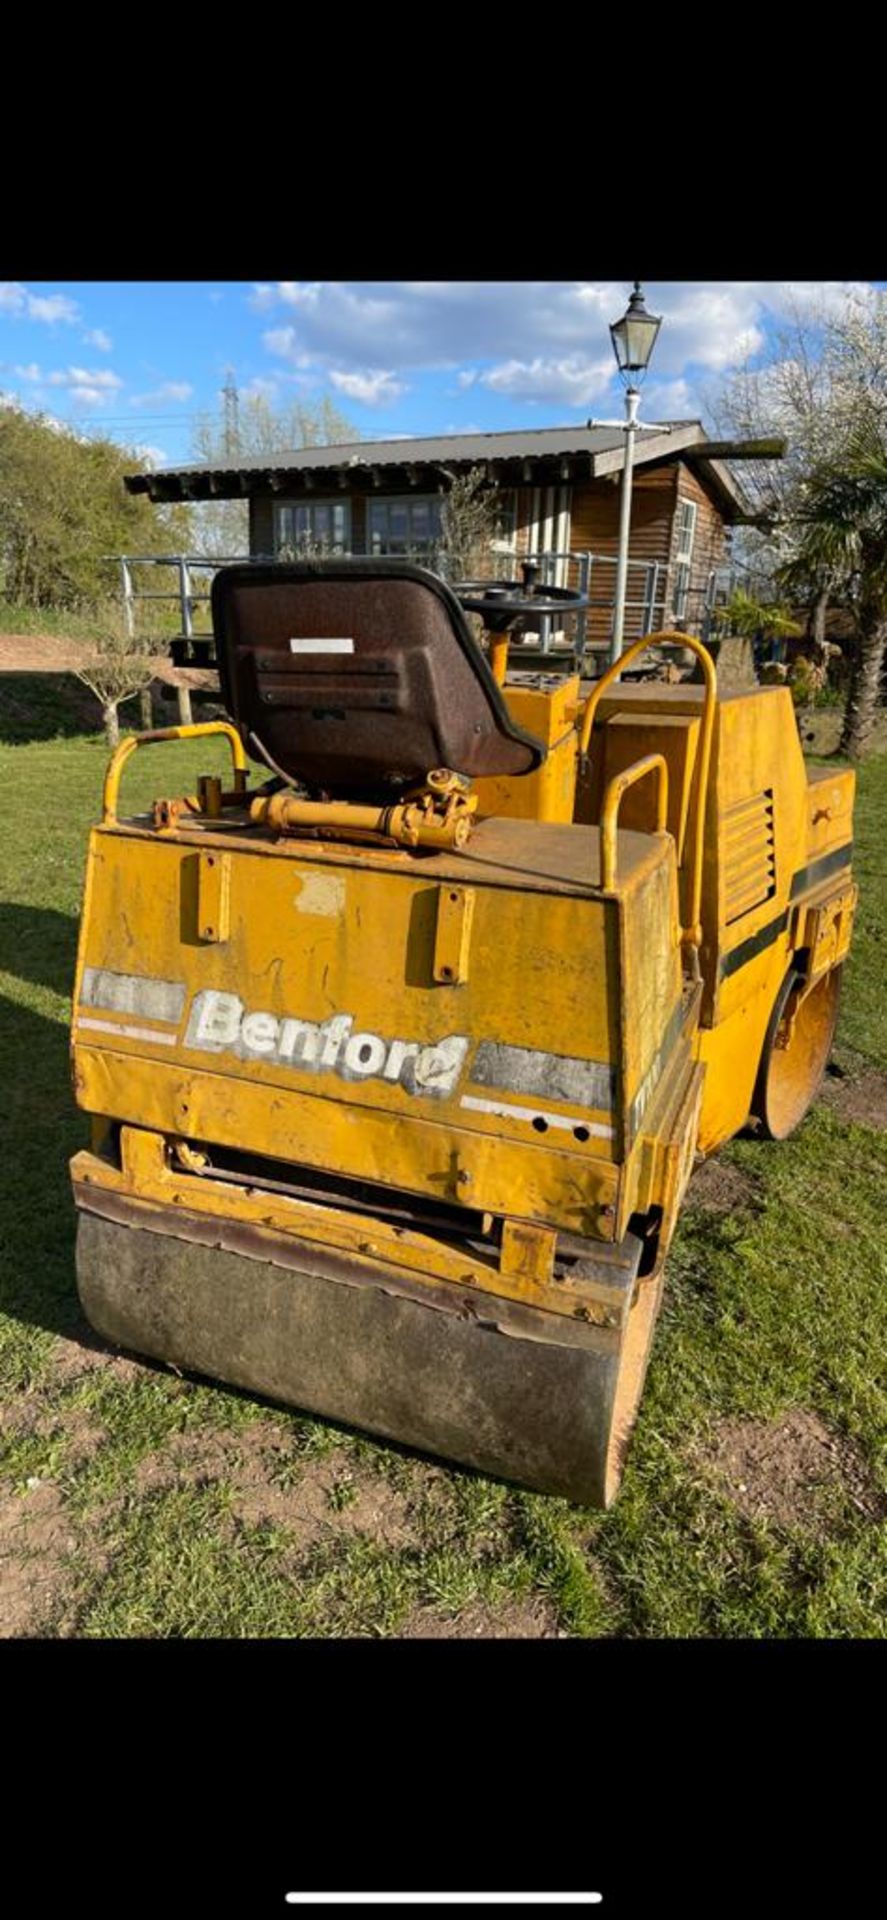 BENFORD TV 100 1000MM ROAD ROLLER TWIN DRUM VIBRATING LISTER ENGINE, OWNED FOR 20+ YEARS *PLUS VAT* - Image 5 of 6